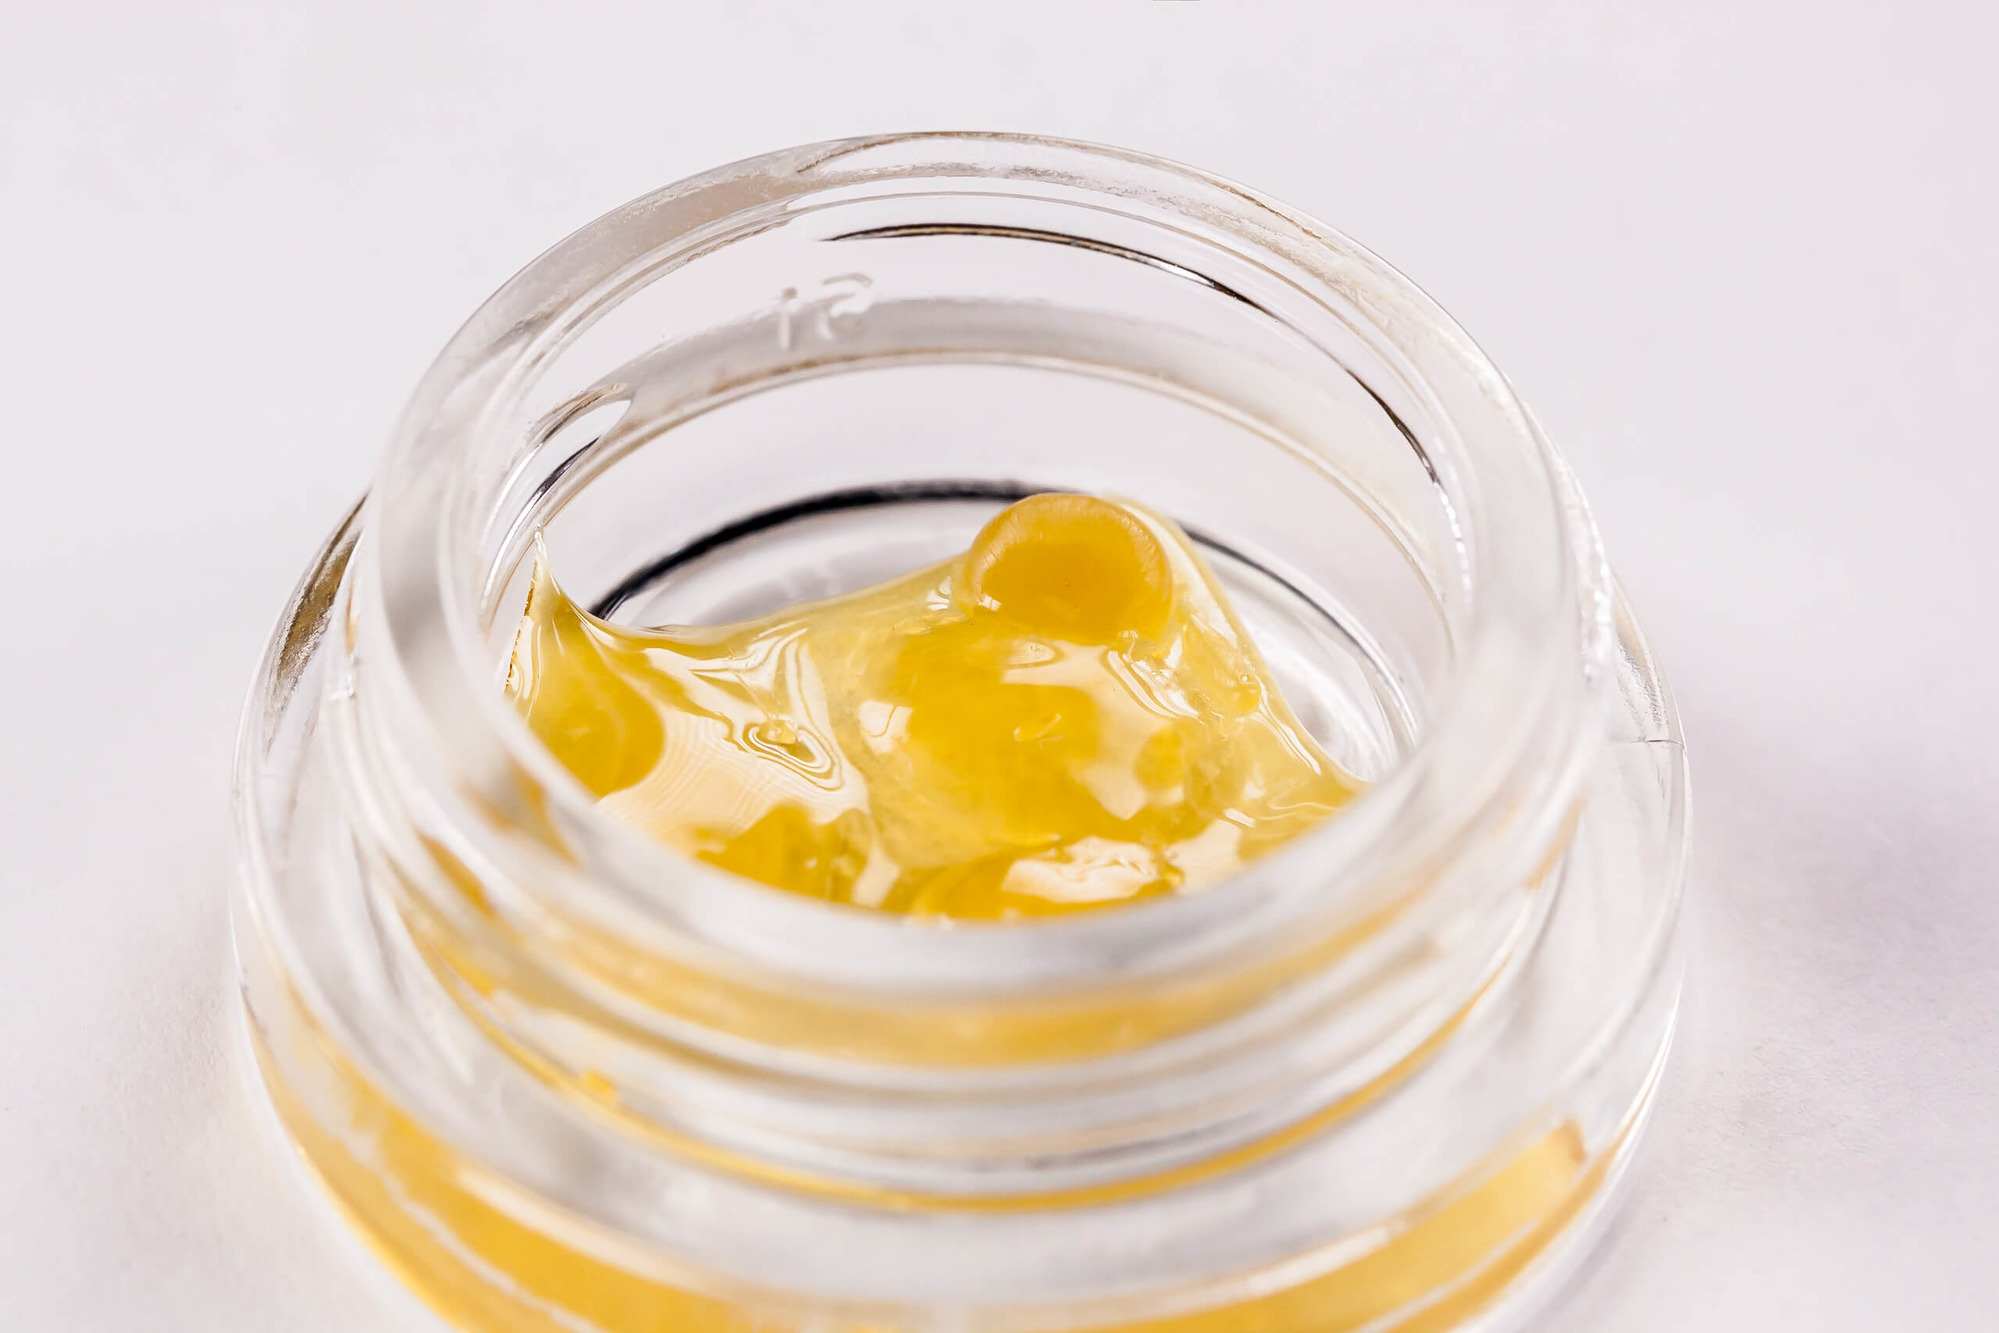 How To Store Shatter, Dabs, Wax And All Your Concentrates Properly